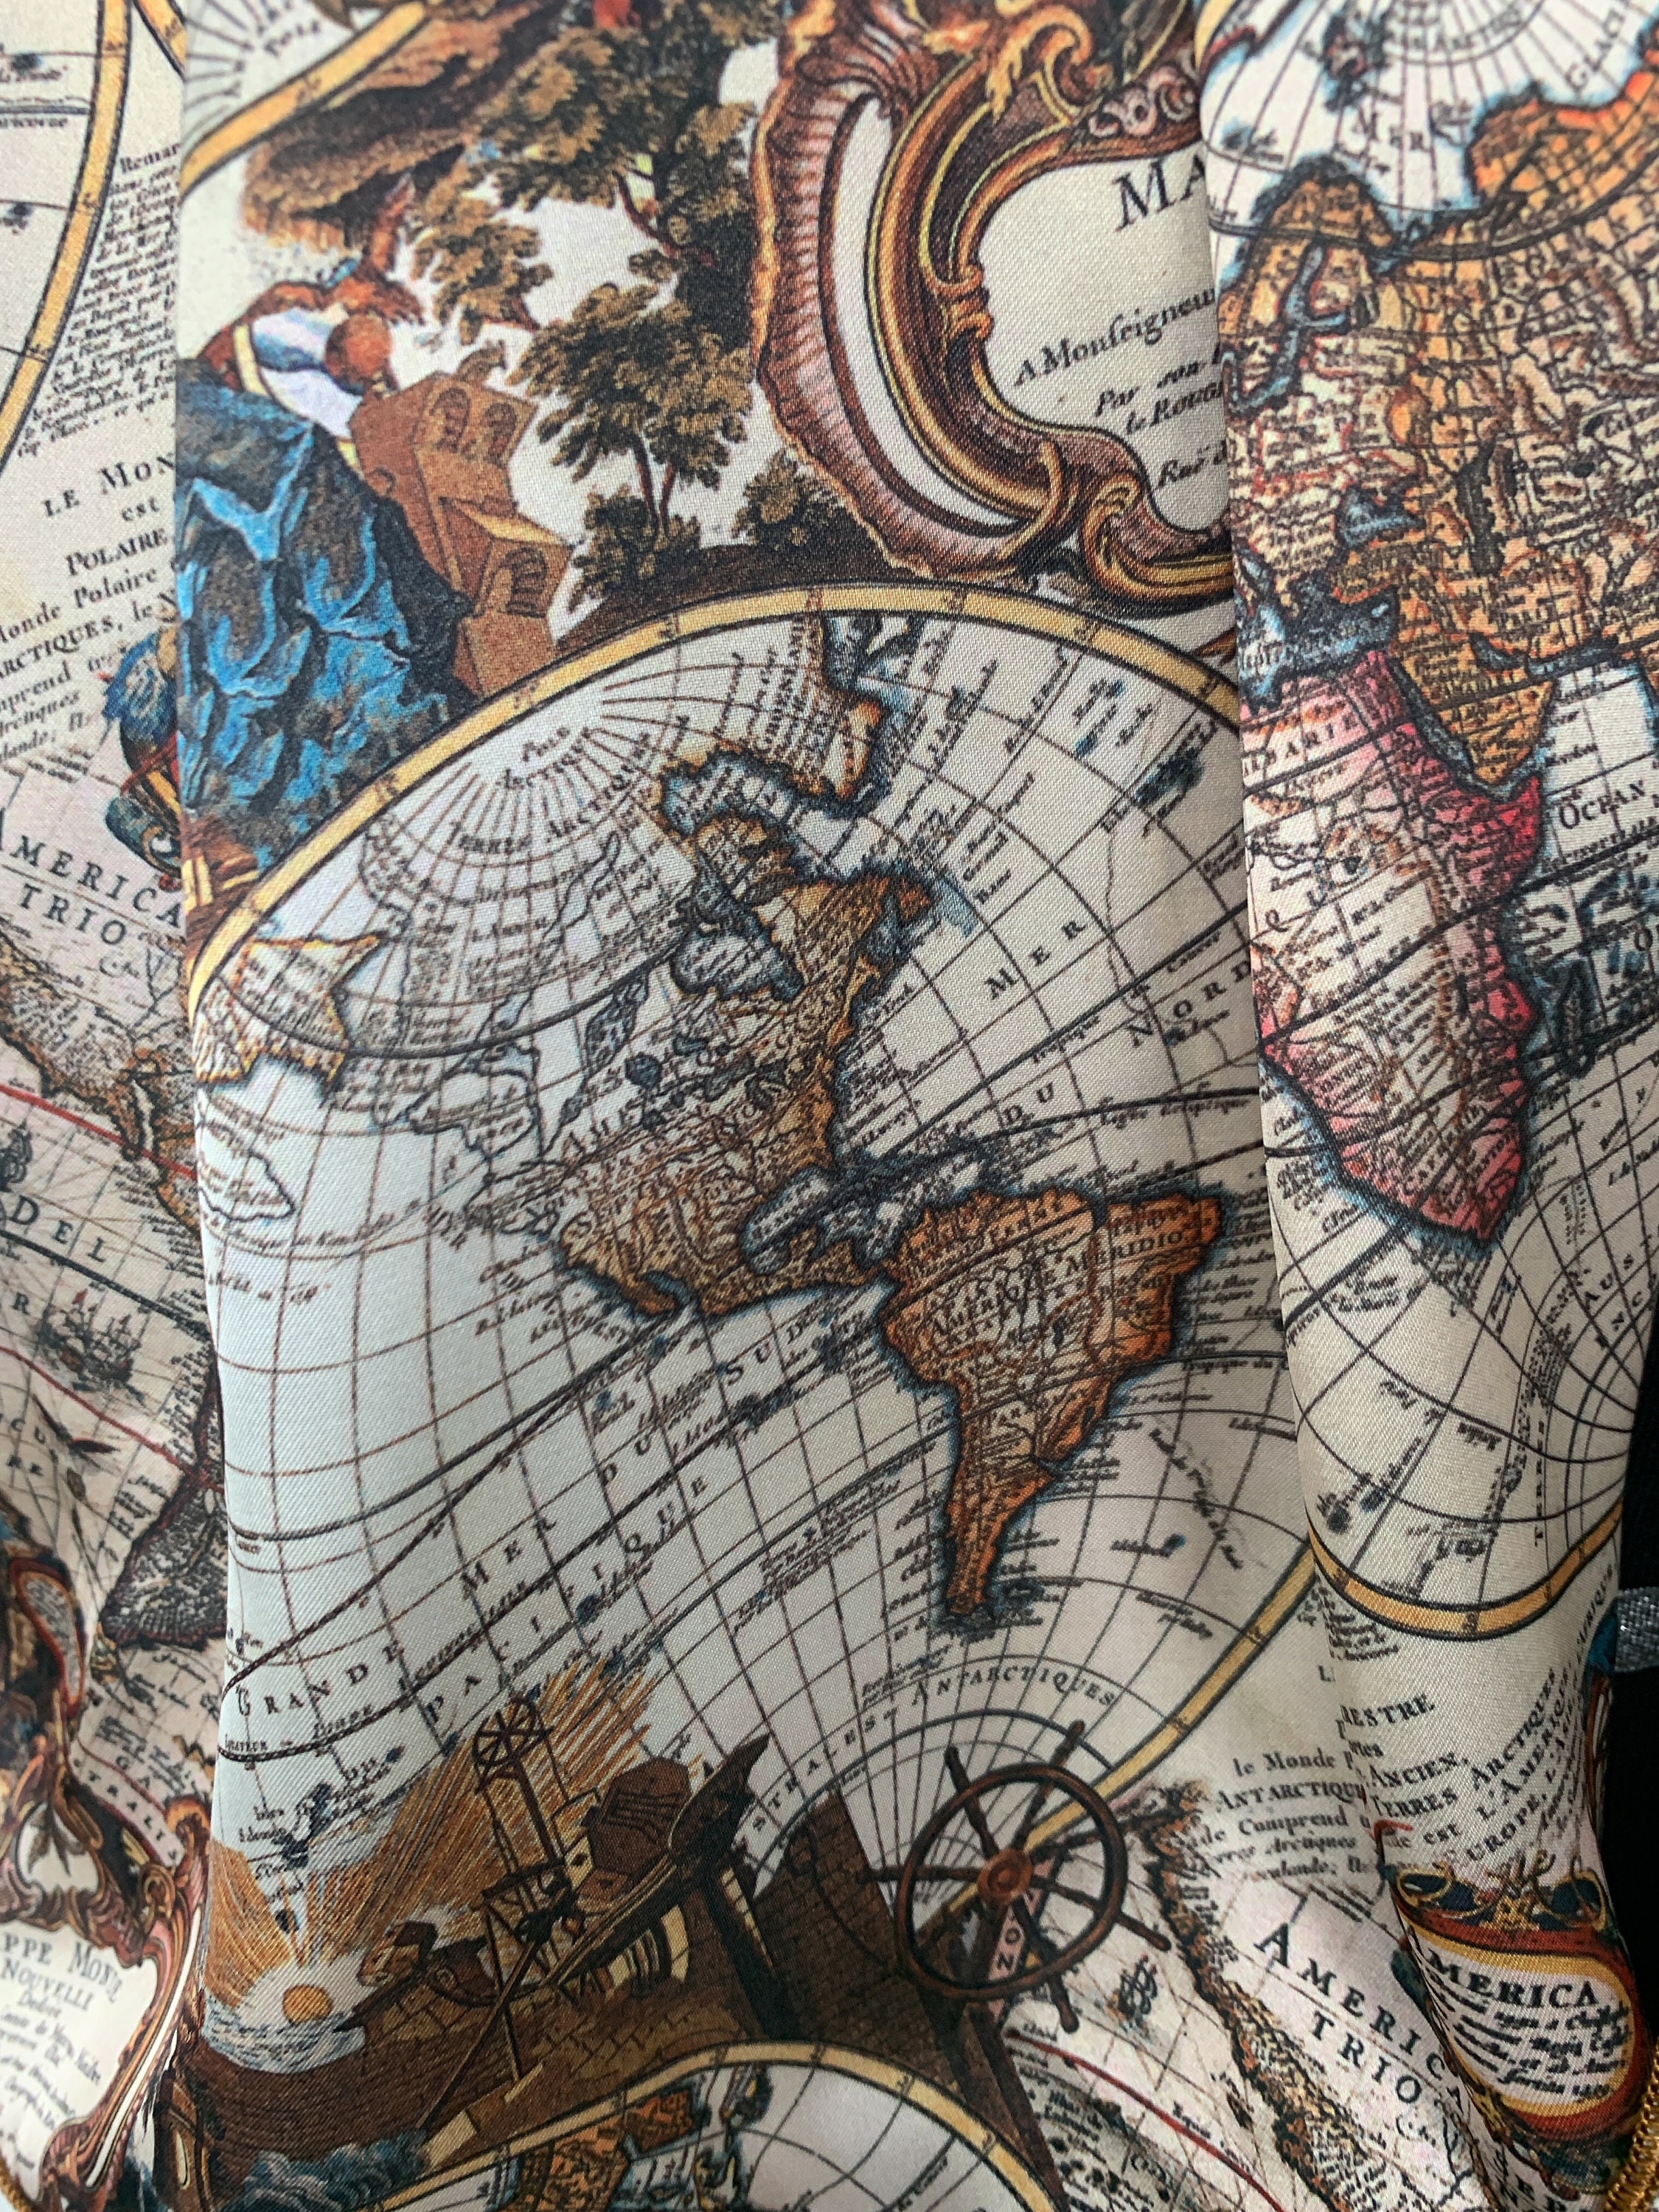 A MAP OF THE WORLD SILK SCARF (90 x 150 cm) - Shop SYNDRO Scarves - Pinkoi